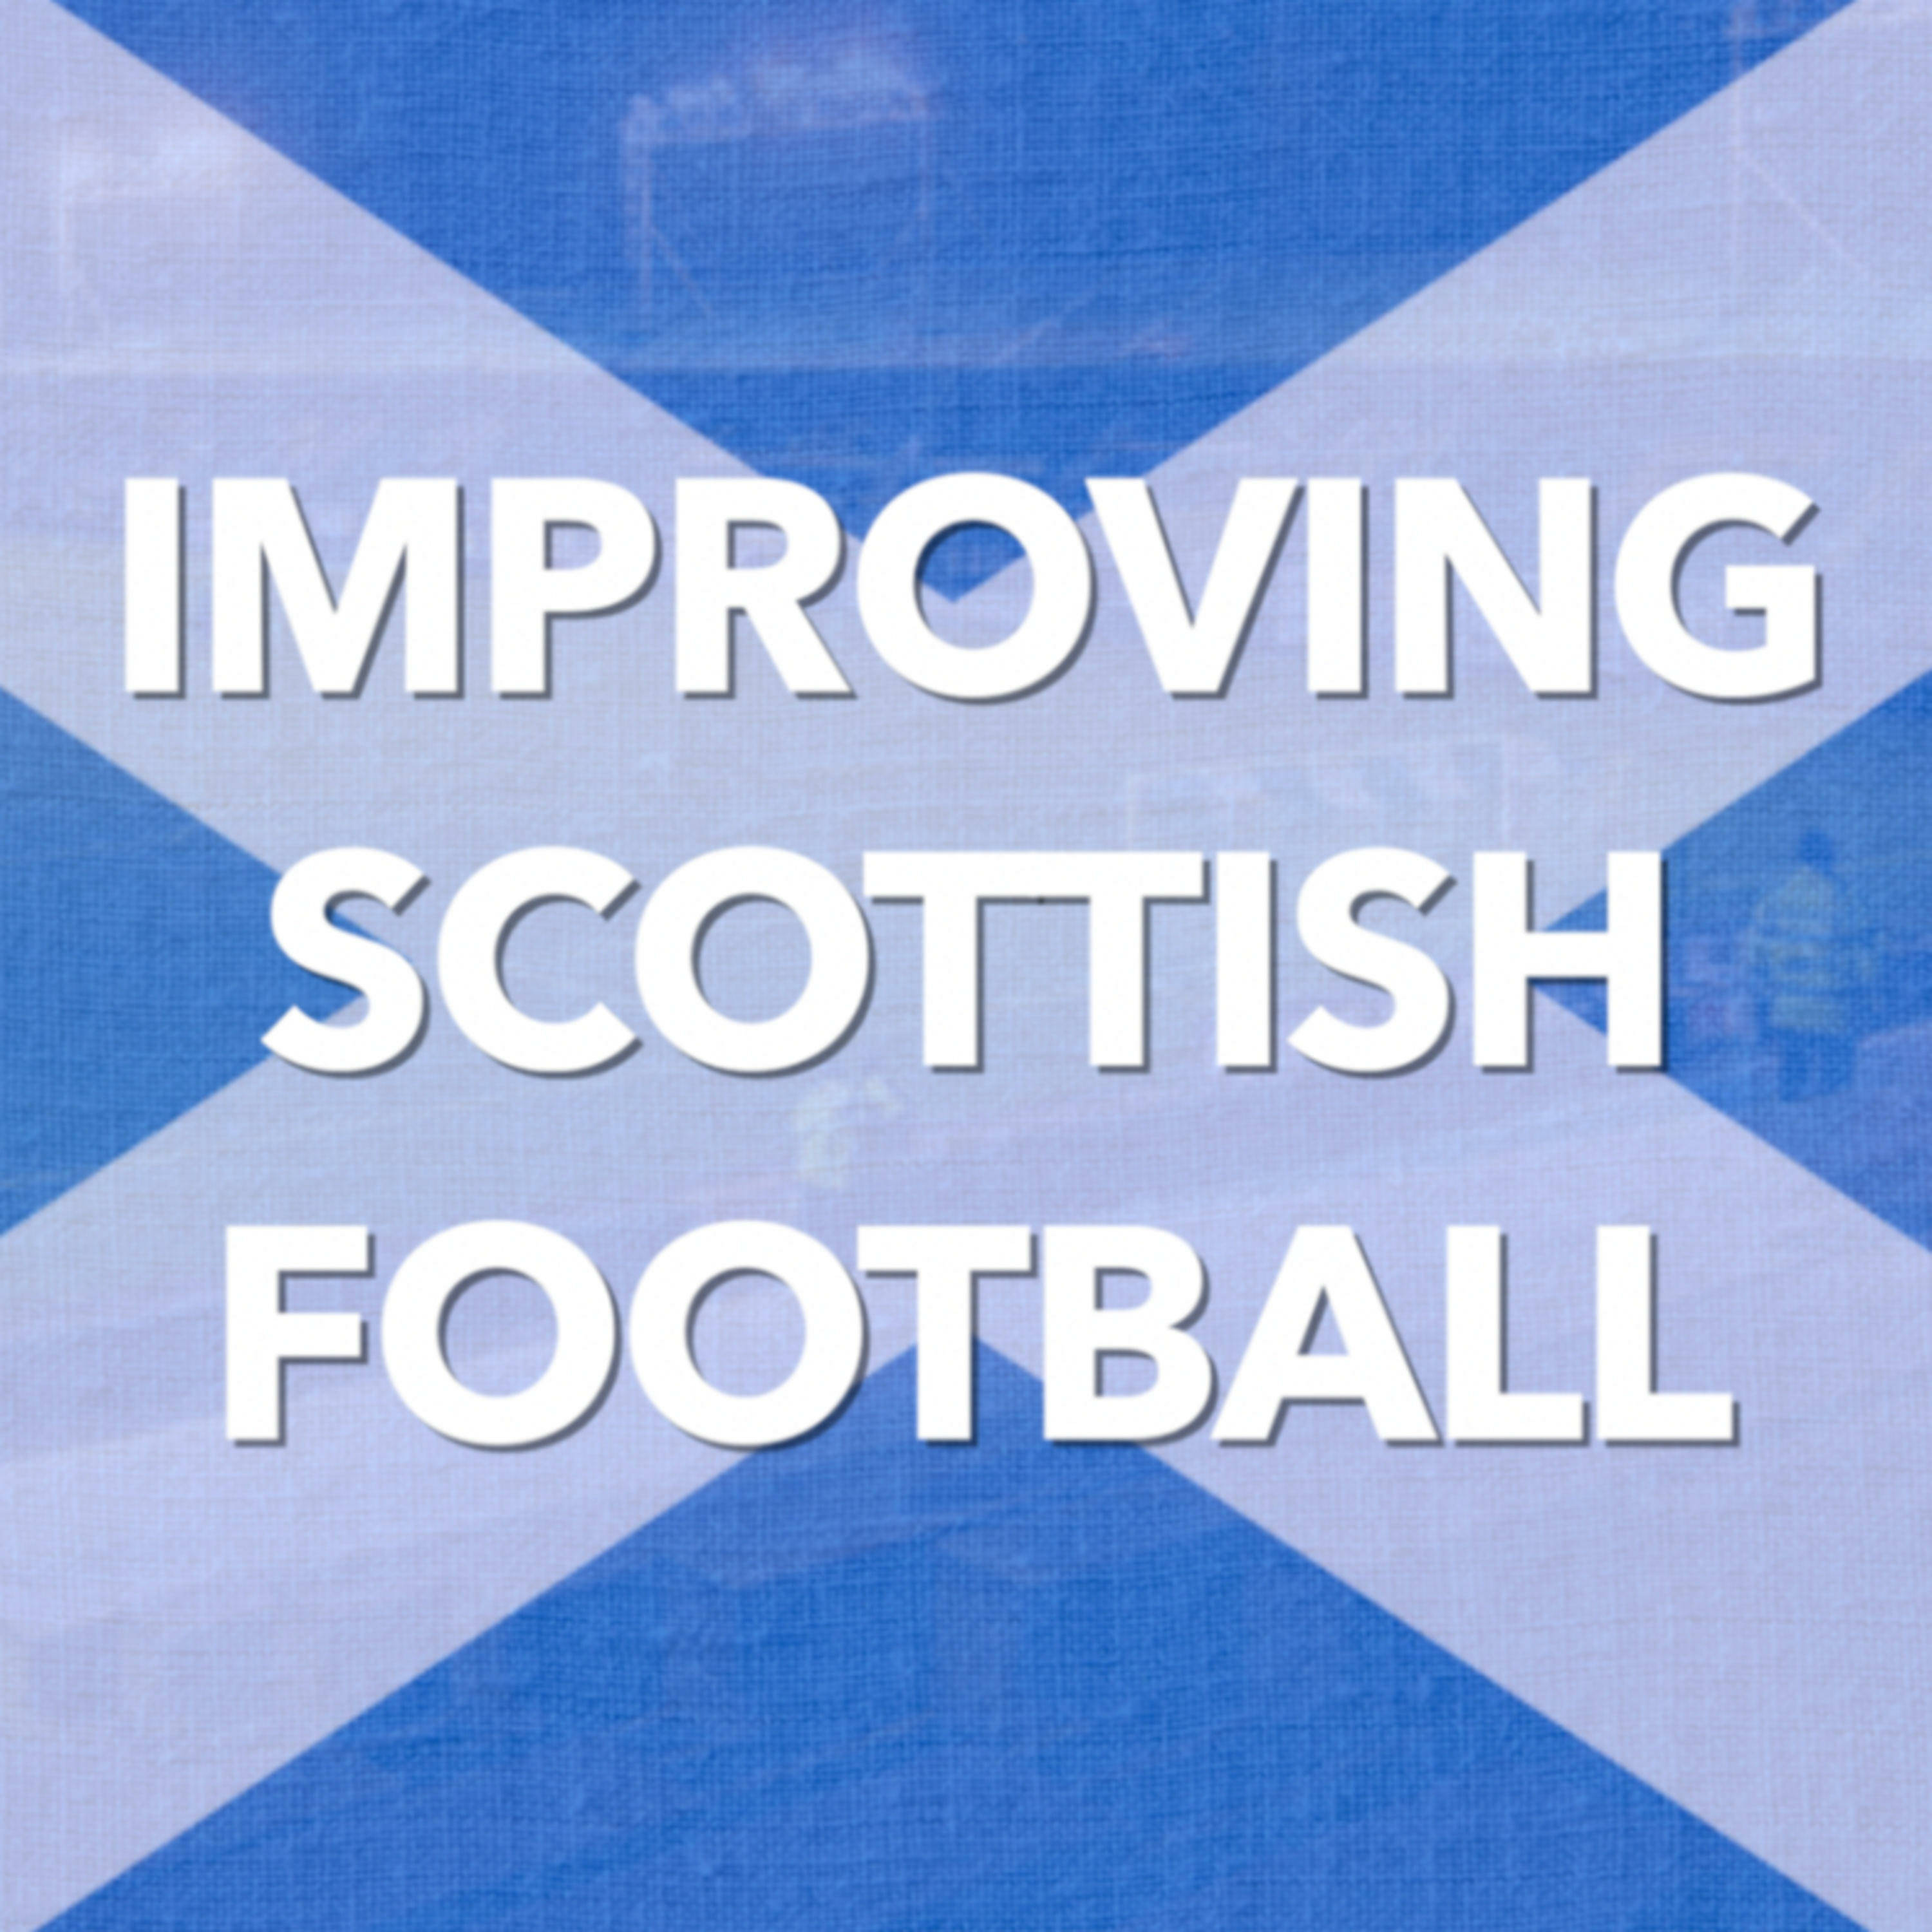 What would you change about Scottish football?